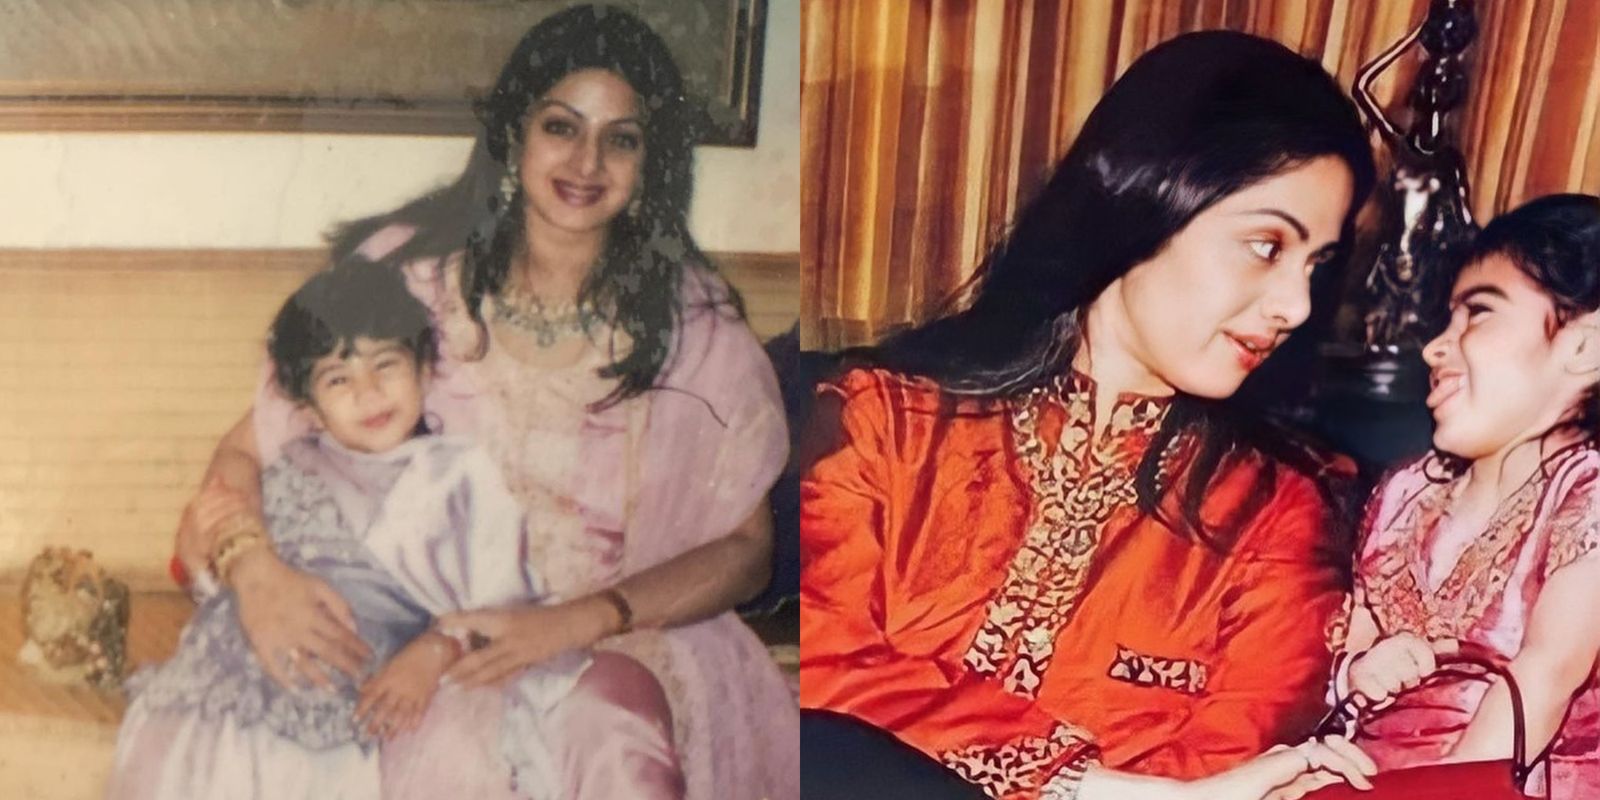 Mother's Day 2021: Janhvi Kapoor, Khushi Kapoor Remember Mom Sridevi, Share Precious Childhood Memories With 'The Best'